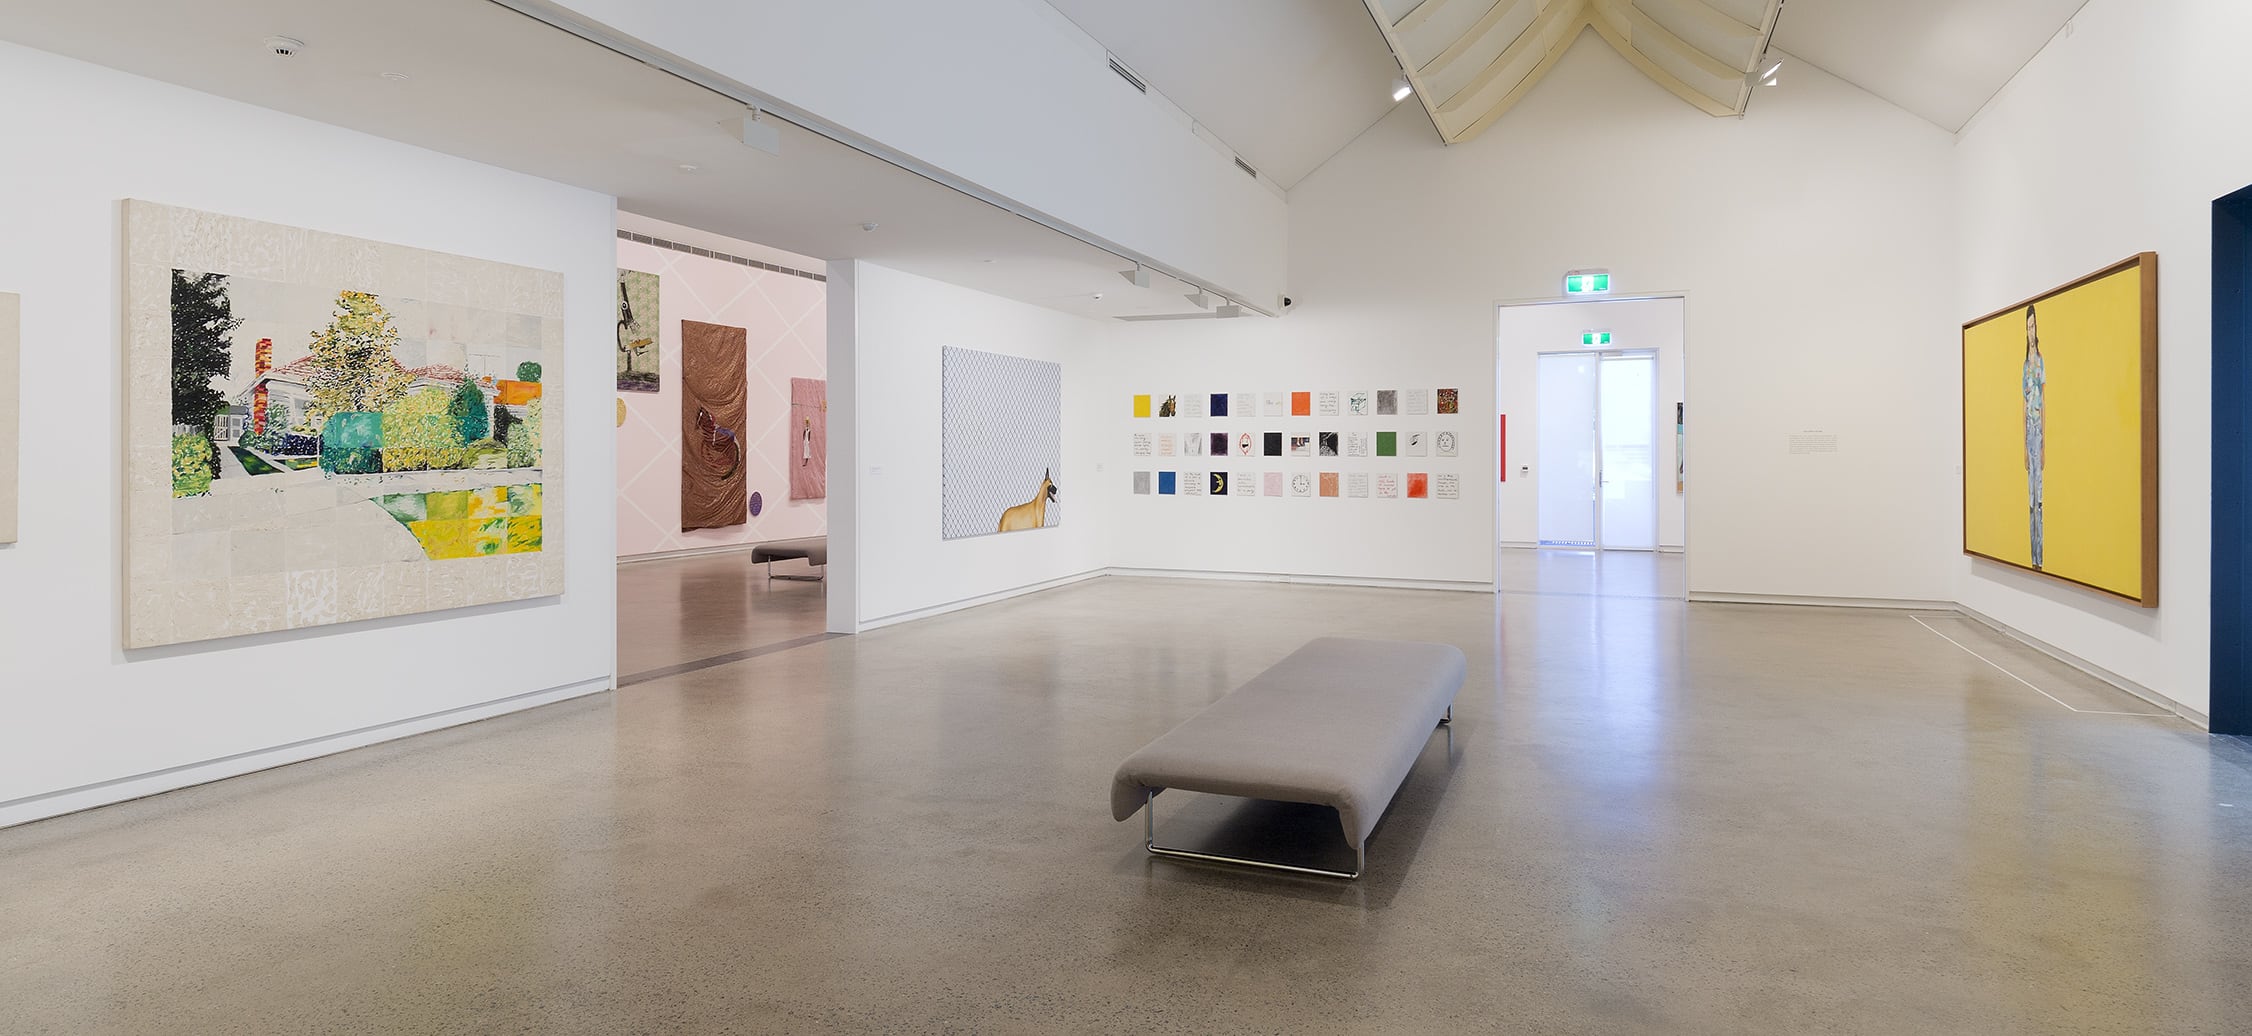 Image 01: Jenny Watson, installation view, 'The Fabric of Fantasy' Heide Museum of Modern Art, Melbourne (4 November 2017 - 4 March 2018). Photo: Christian Capurro.